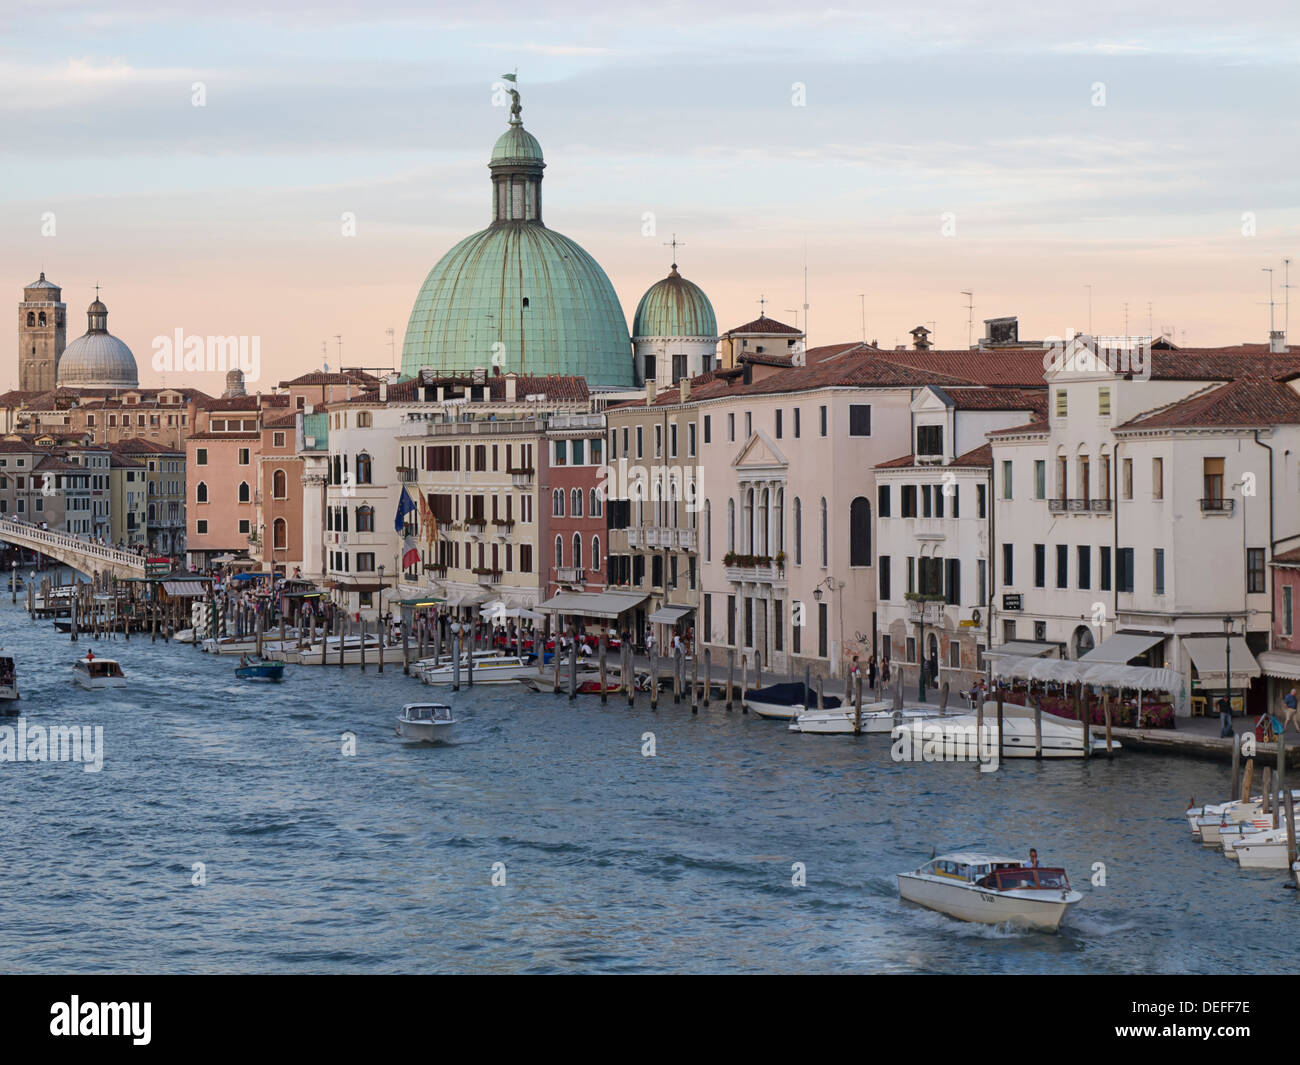 Dome behind the Franchetti Palace in Venice, Italy during sunset with in the foreground Riva de Biasio-Ferrovia Stock Photo